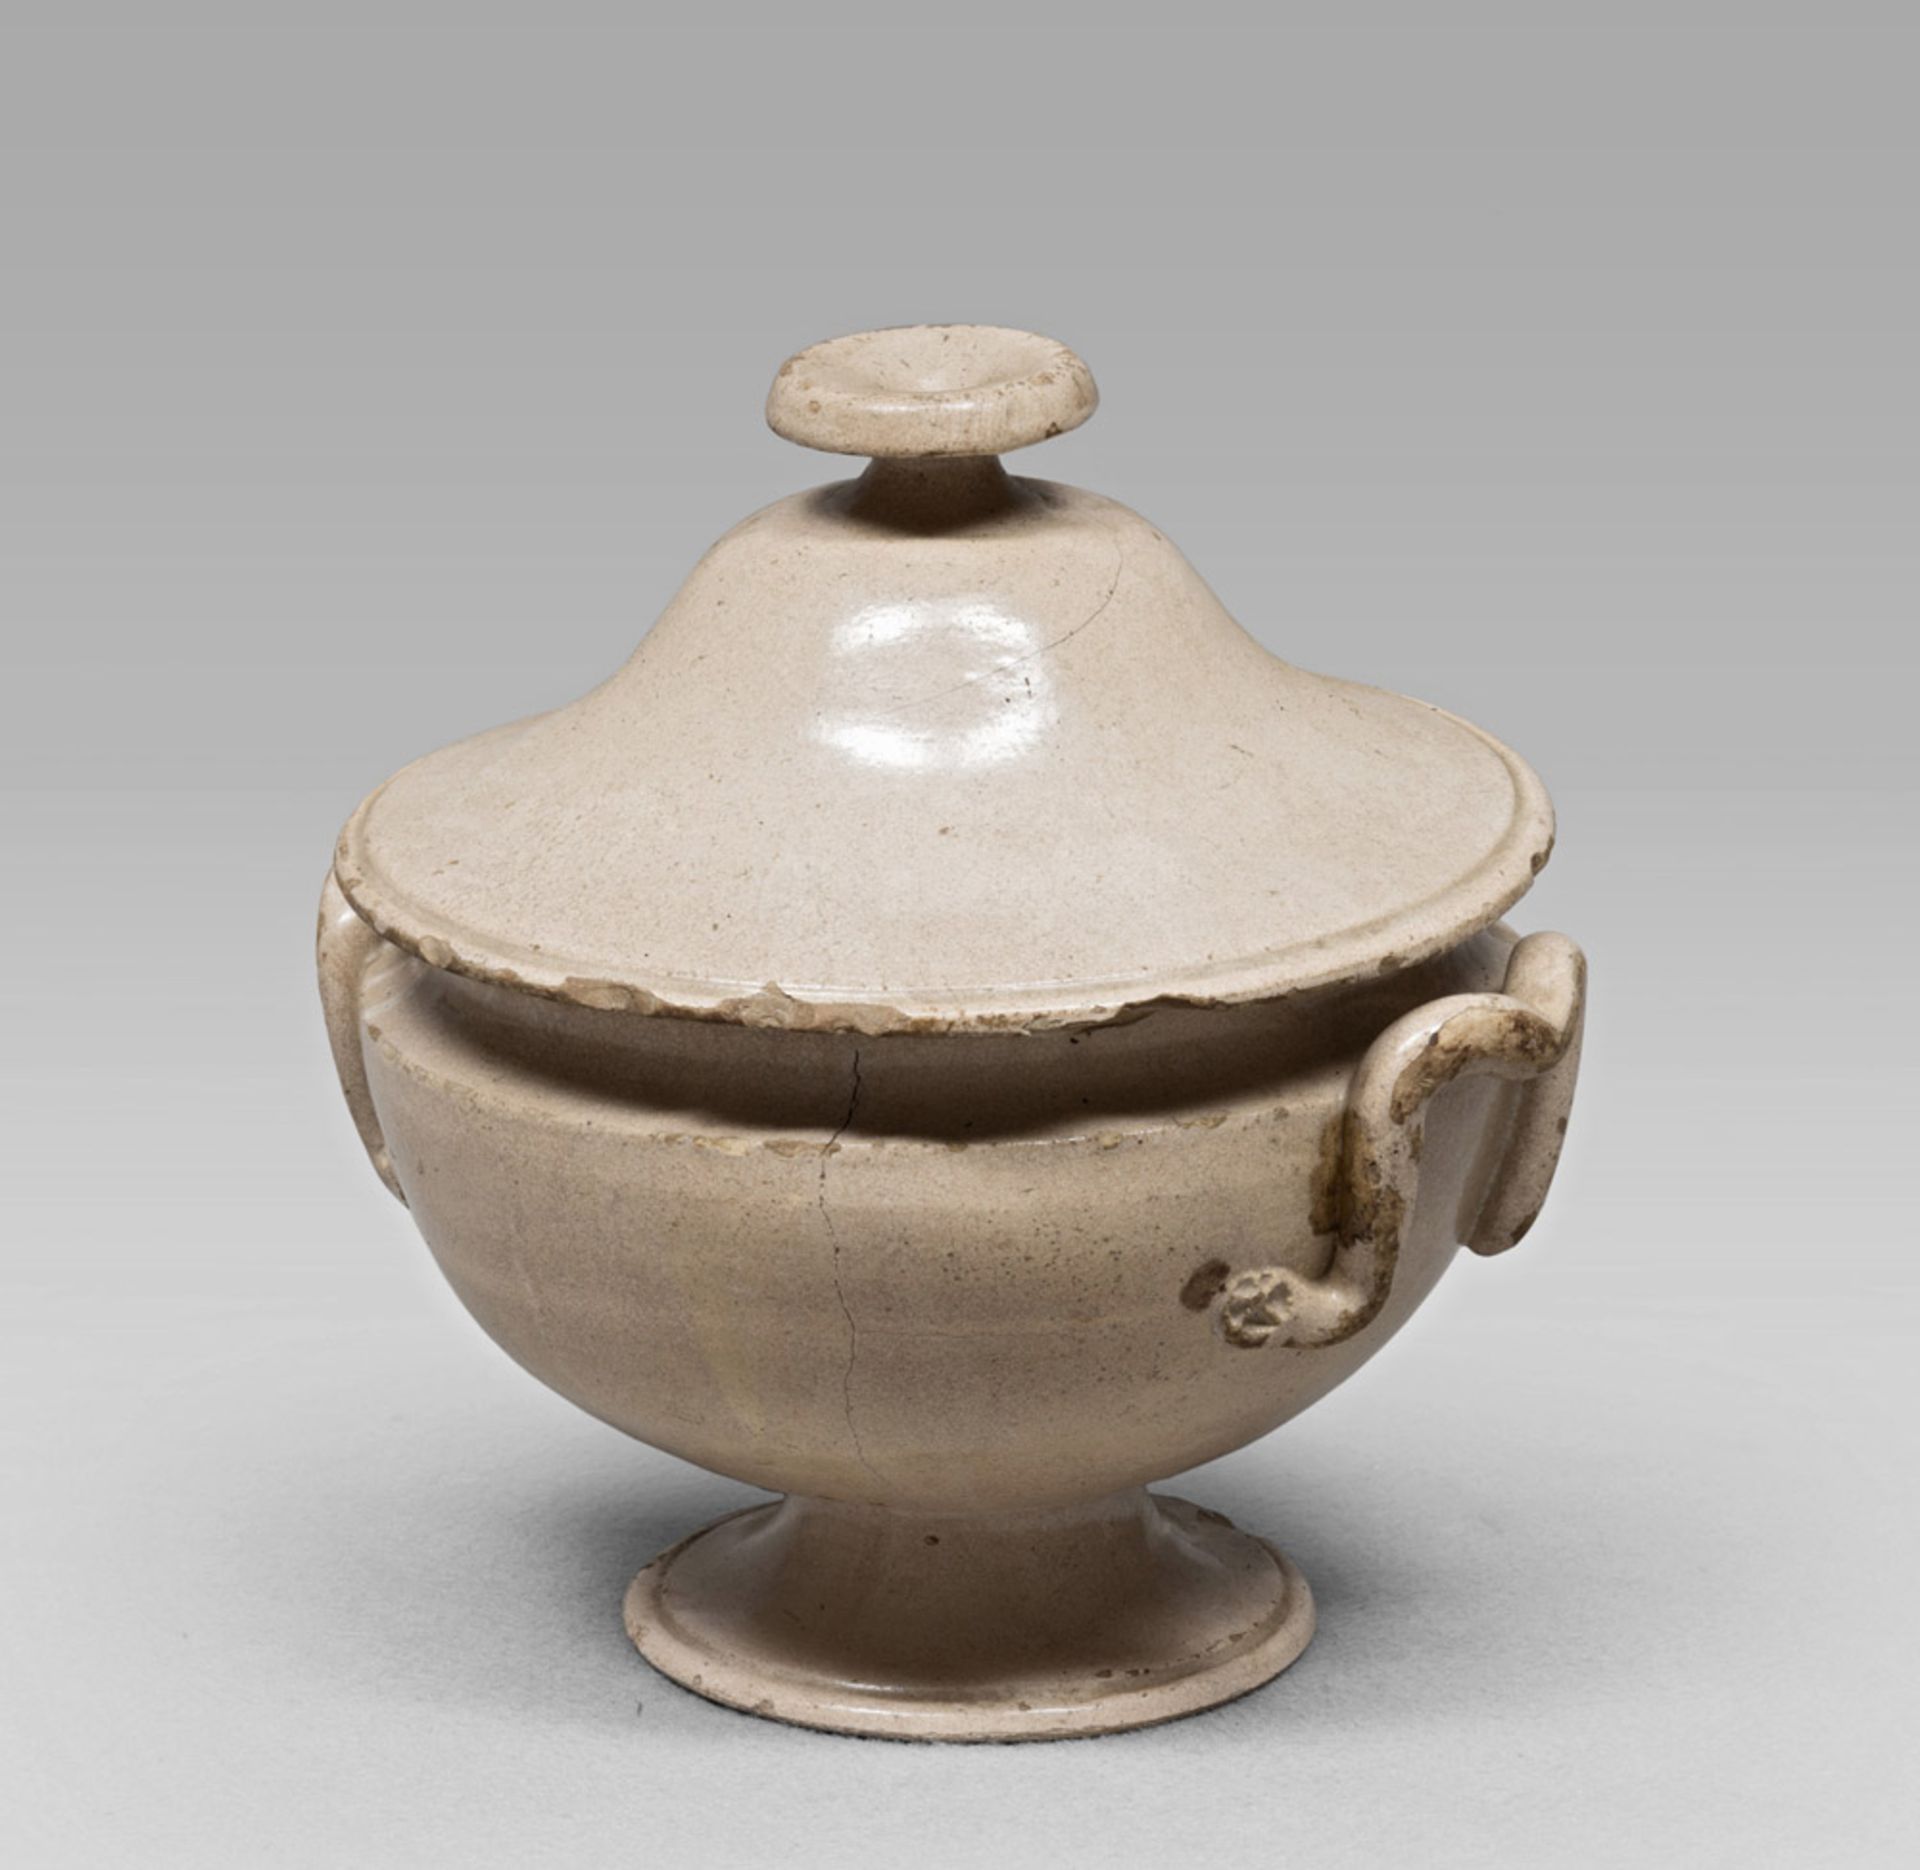 SMALL EARTHENWARE TUREEN, NAPLES EARLY 19TH CENTURY with shaped handles. Measures cm. 27 x 27 x